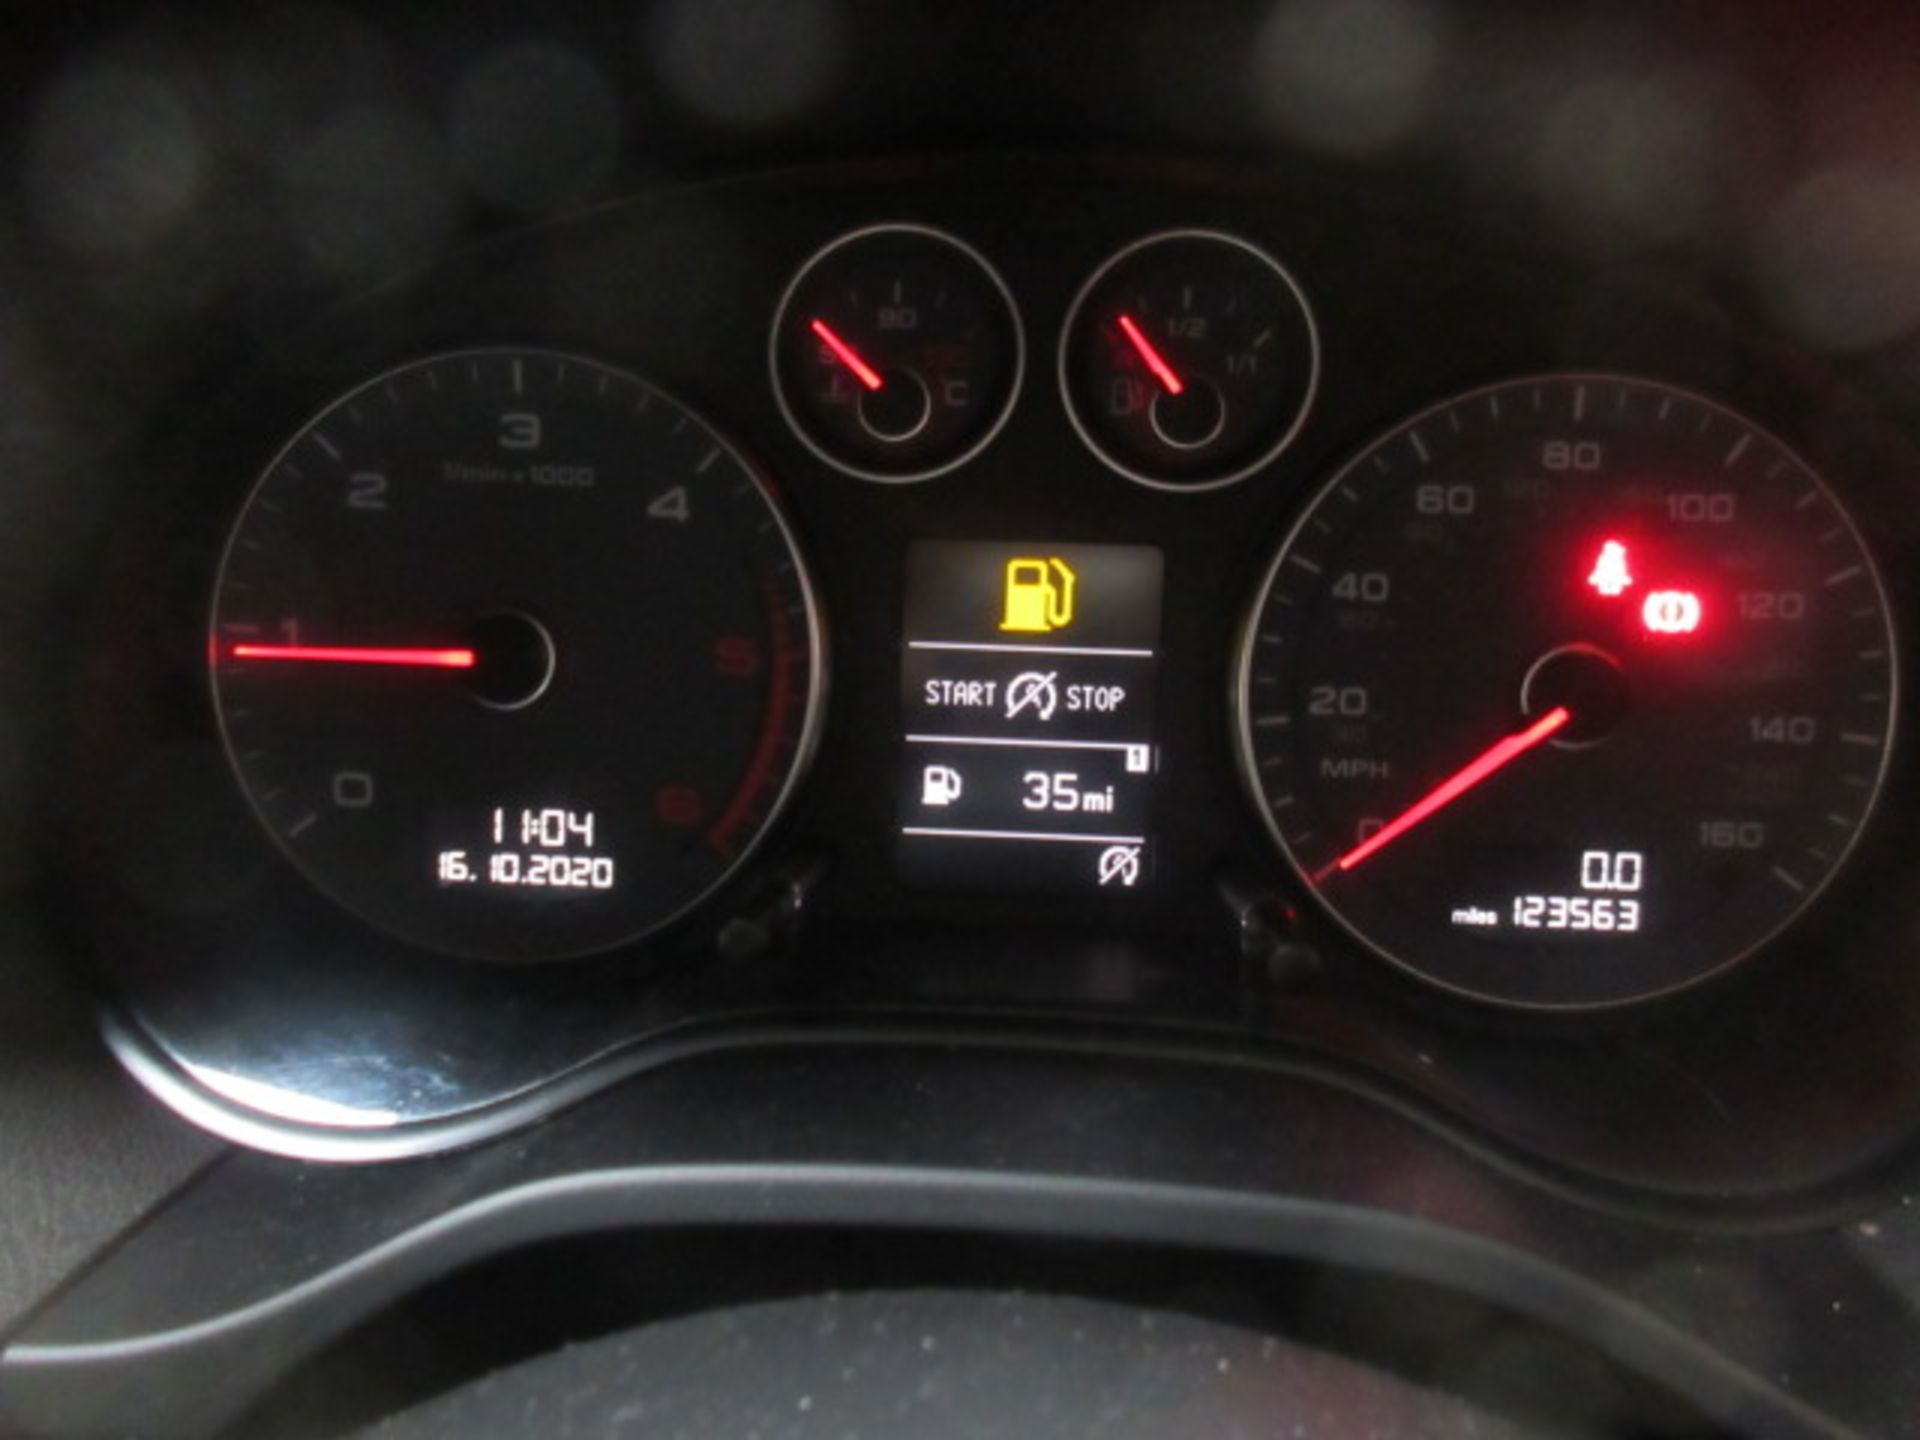 11 11 Audi A3 S Line Sp Edition TDI - Image 7 of 7